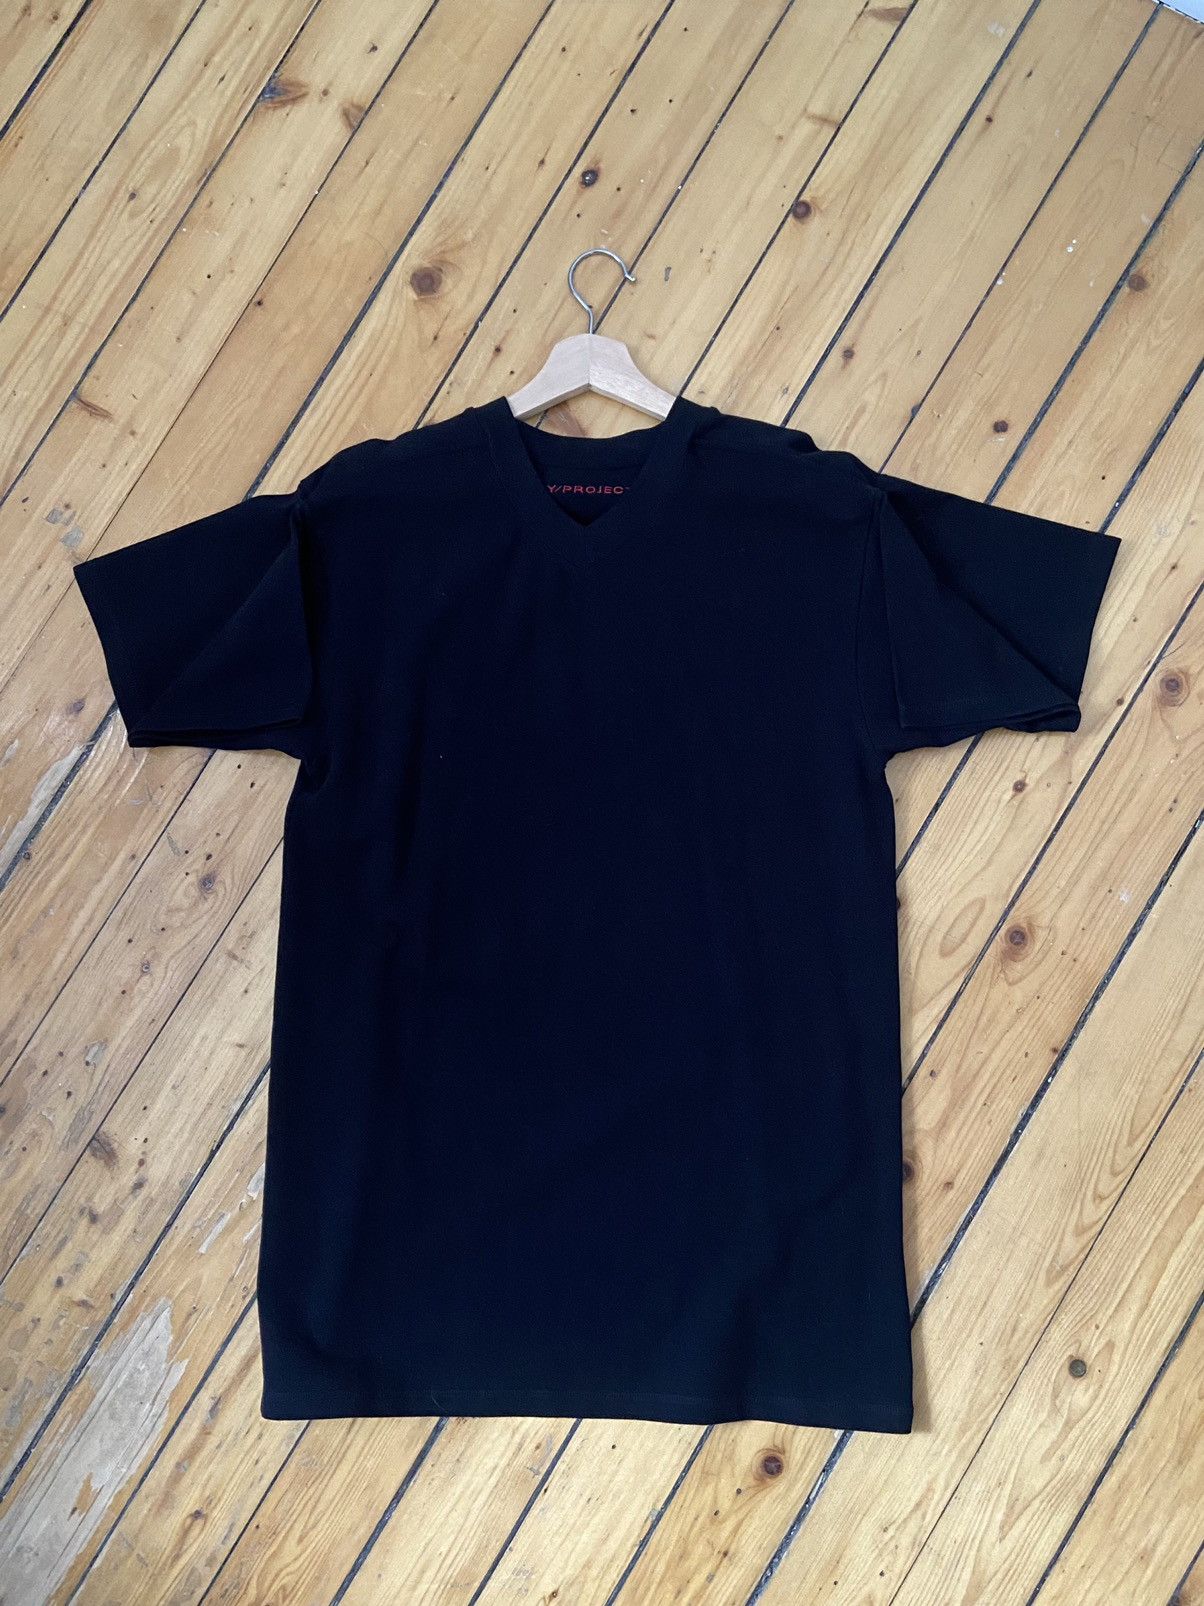 Y/Project Double sleeve t shirt Size US M / EU 48-50 / 2 - 2 Preview